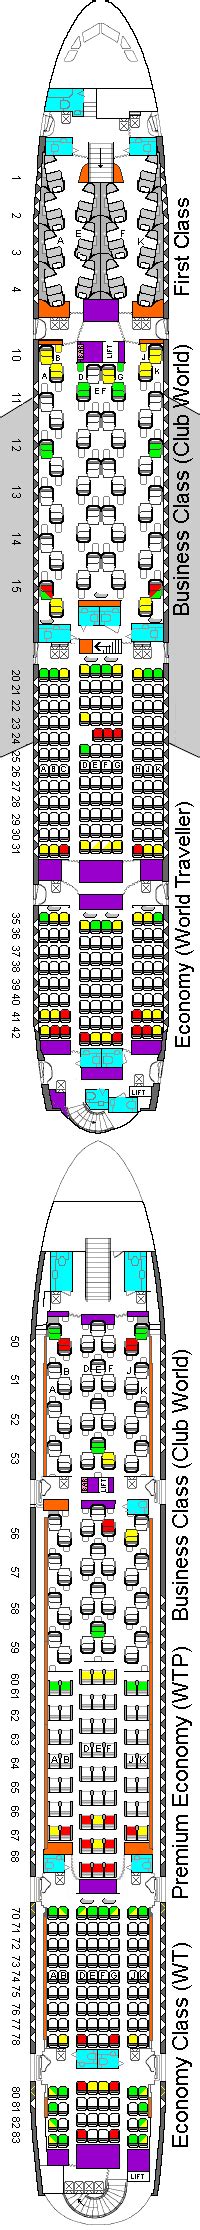 British Airways A380 Seat Map And Seat Pictures Ba A388 Seating Chart